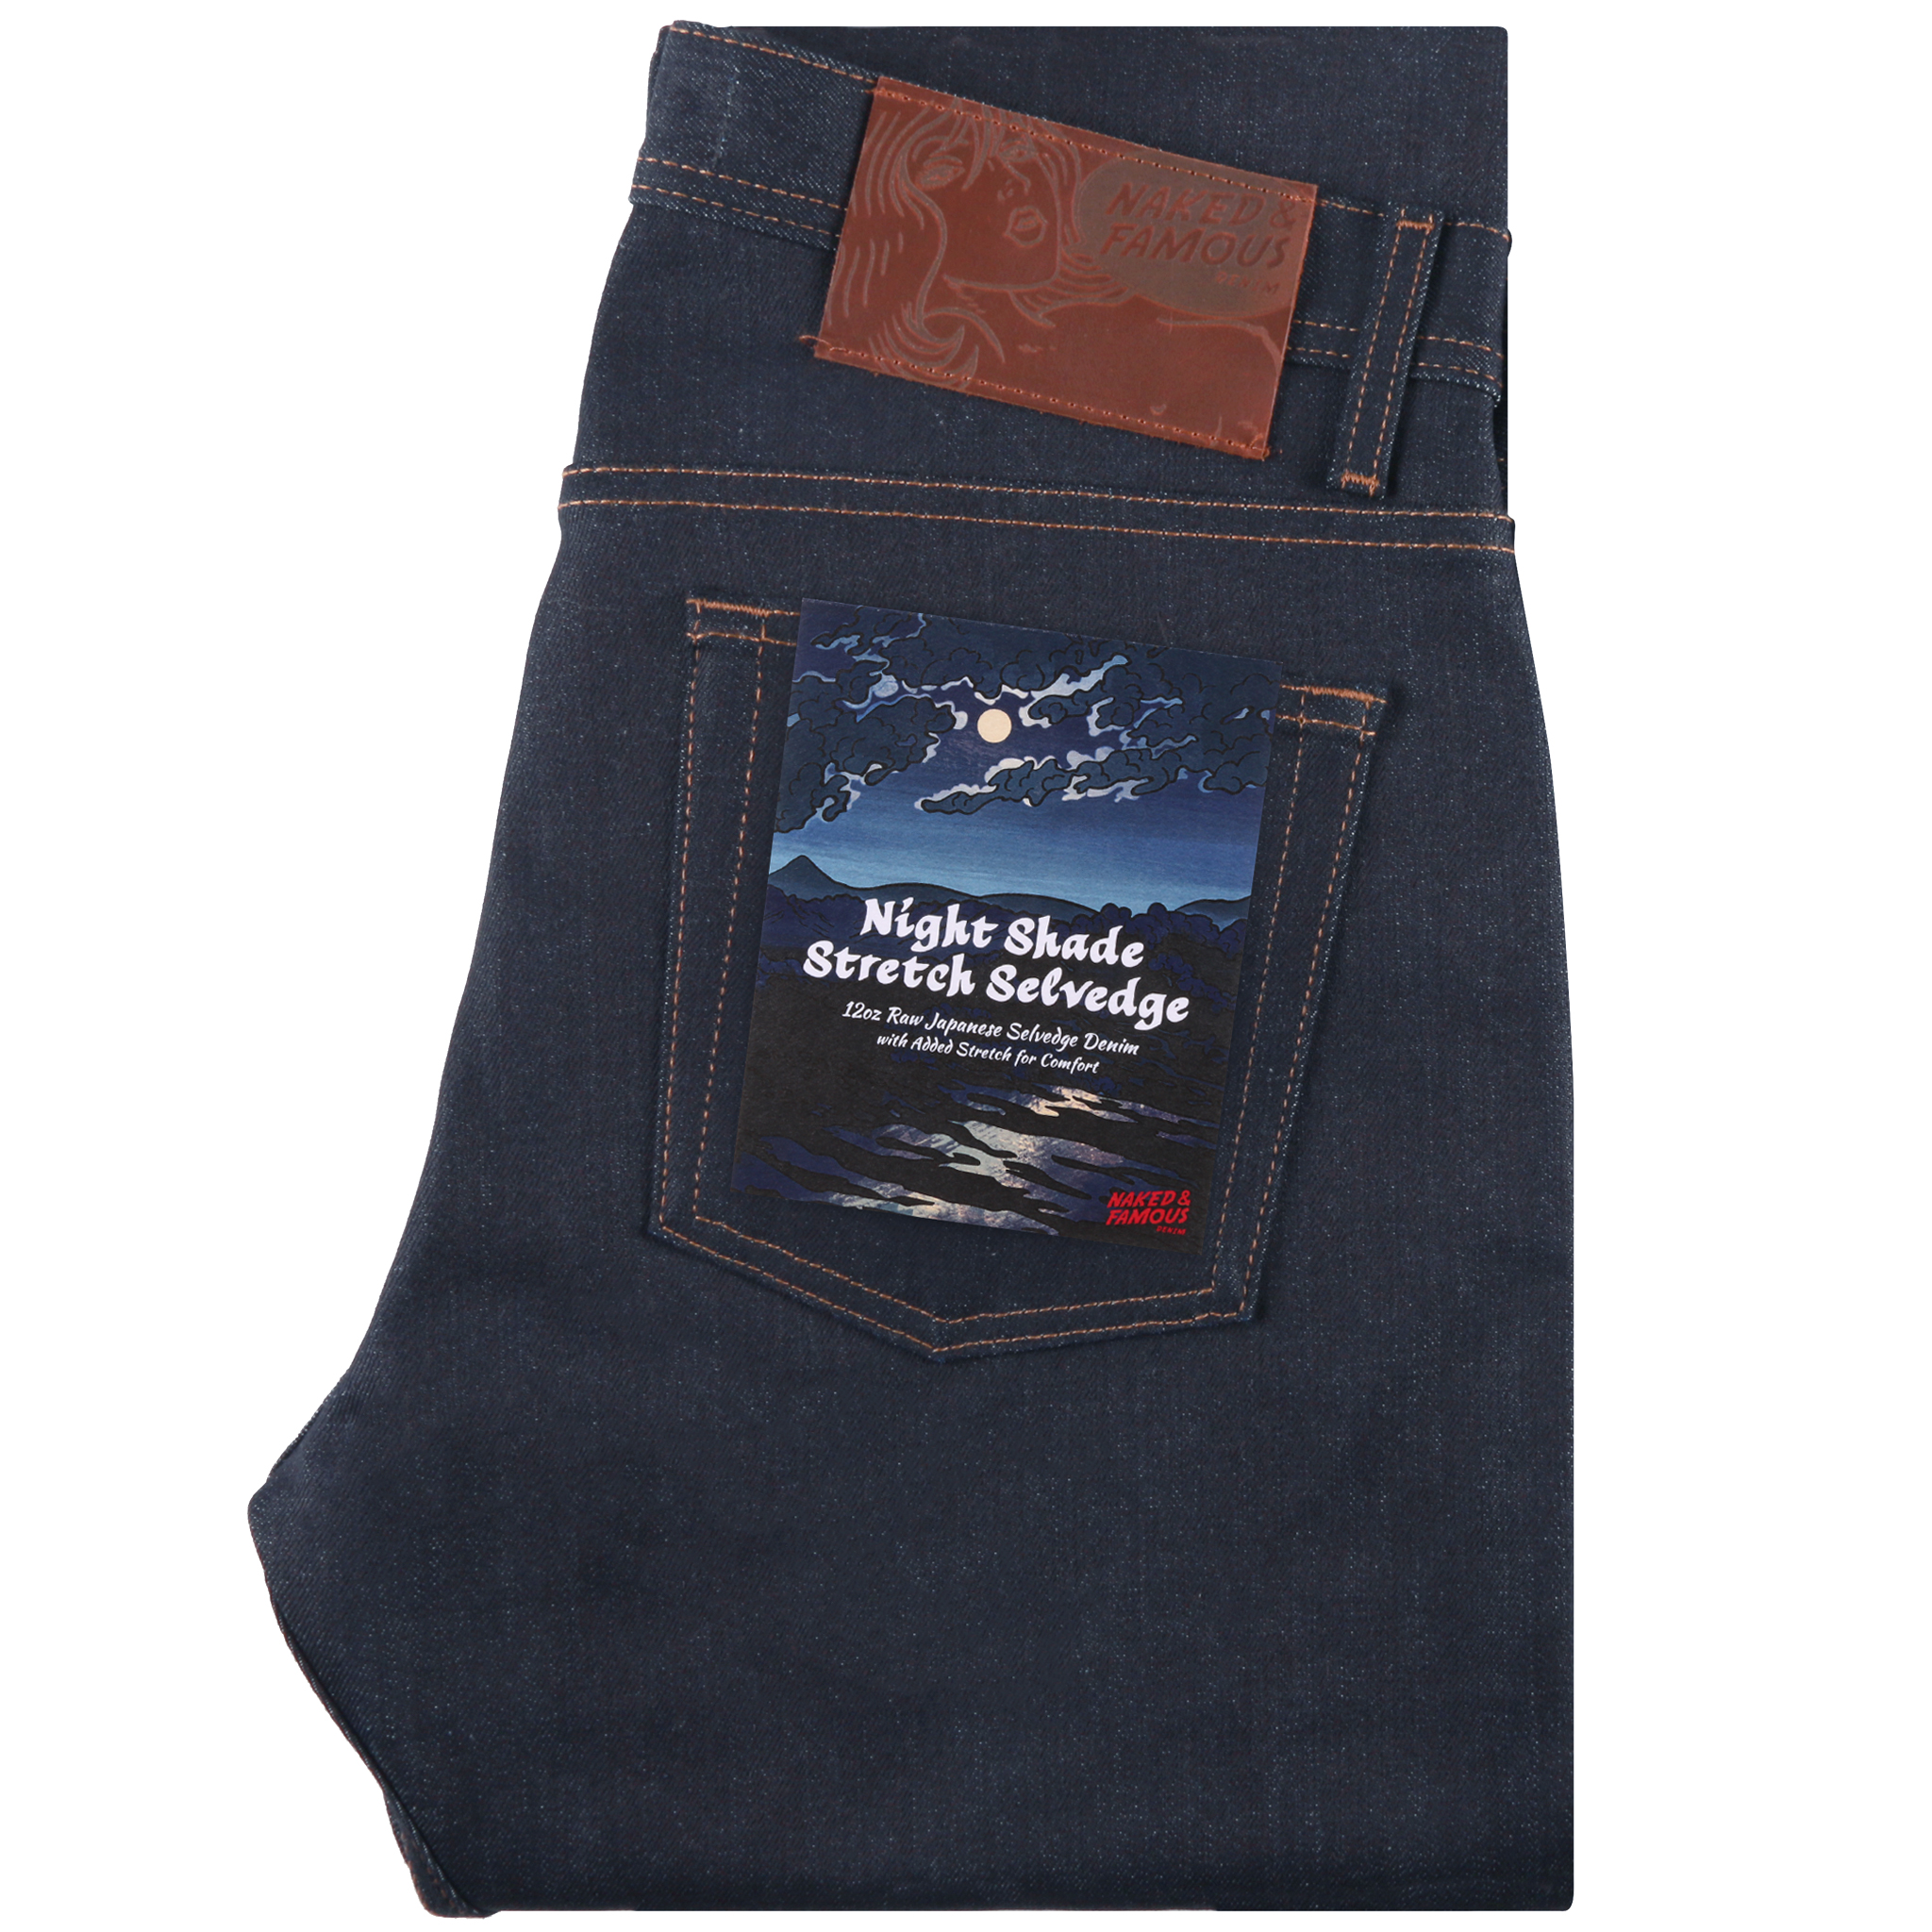  Night Shade Stretch Selvedge Jeans Folded 